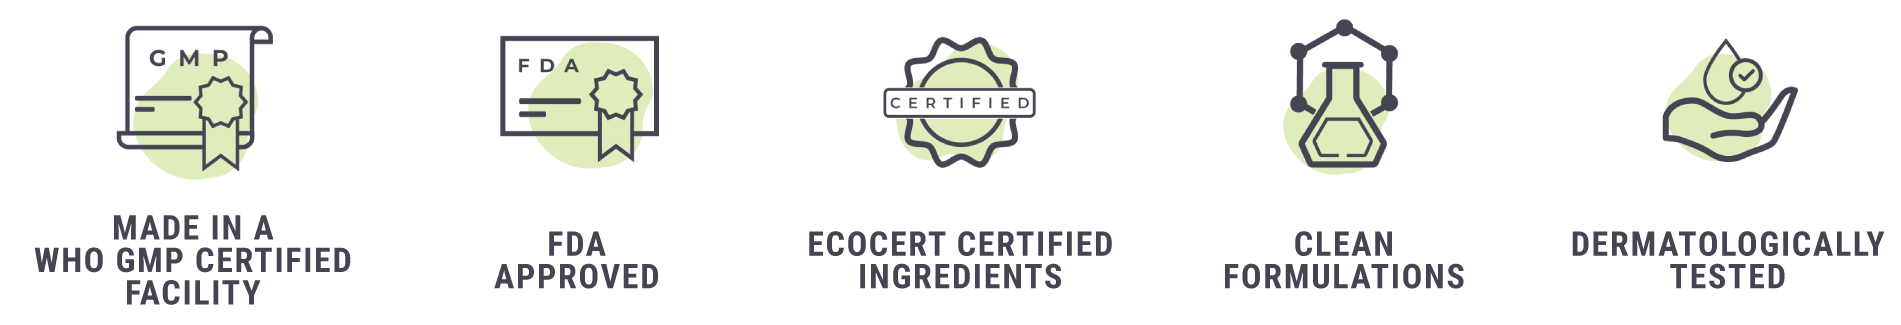 Teenilicious Product Certifications